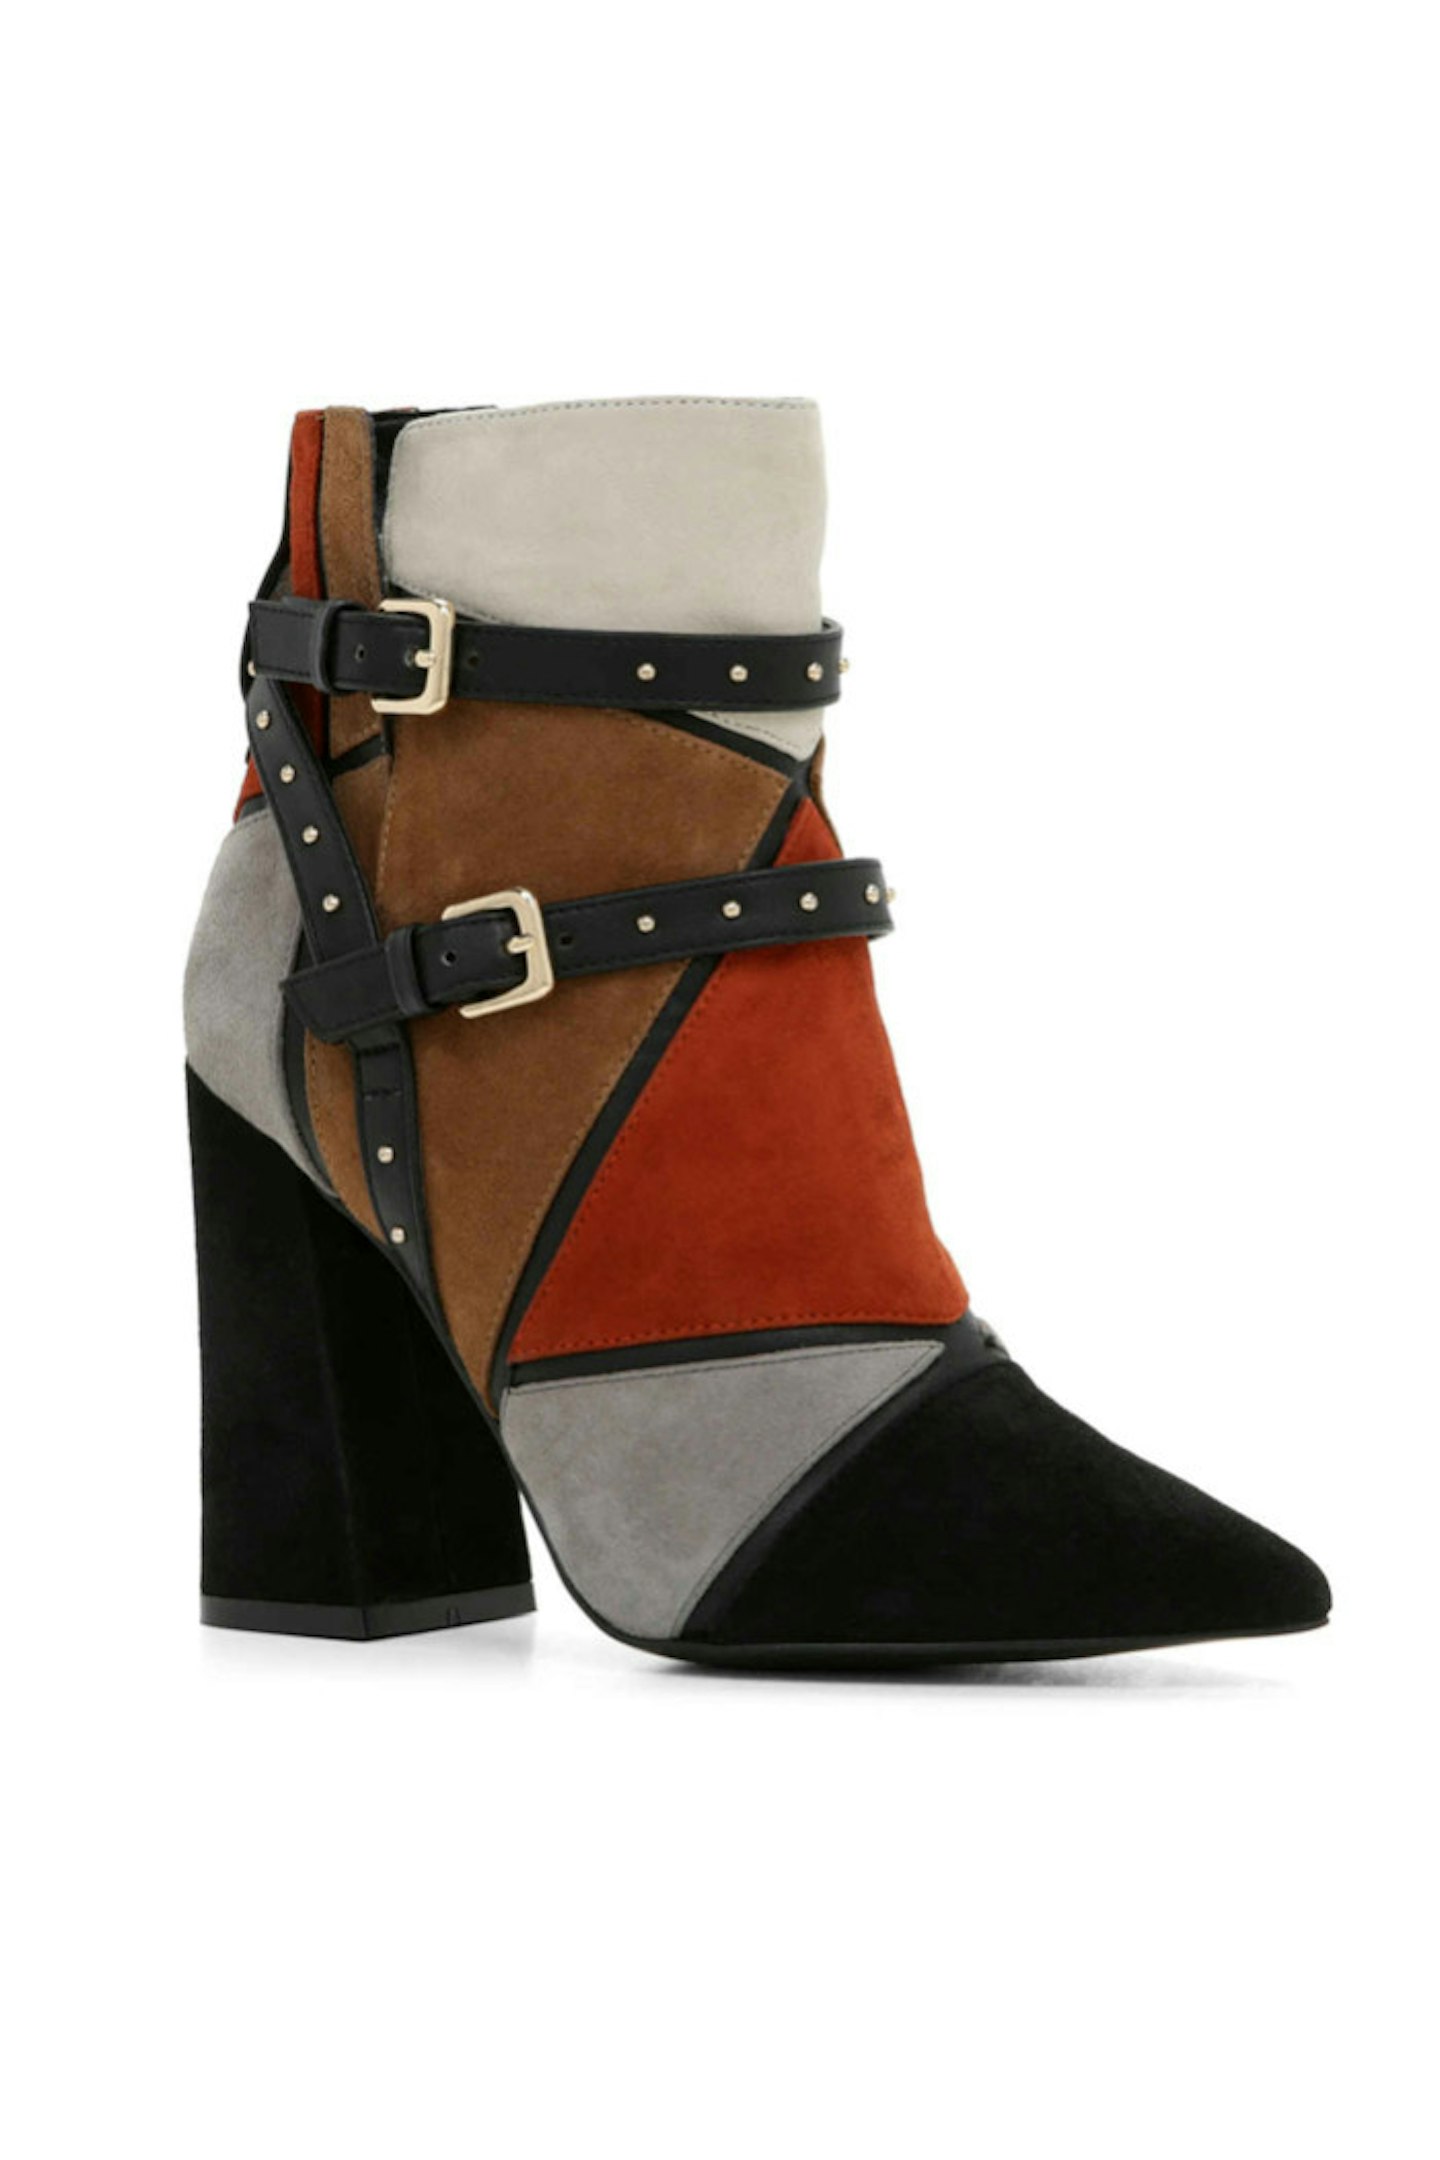 Aldo has got it so right with these pointed toe boots. The studded strap adds a little extra something.